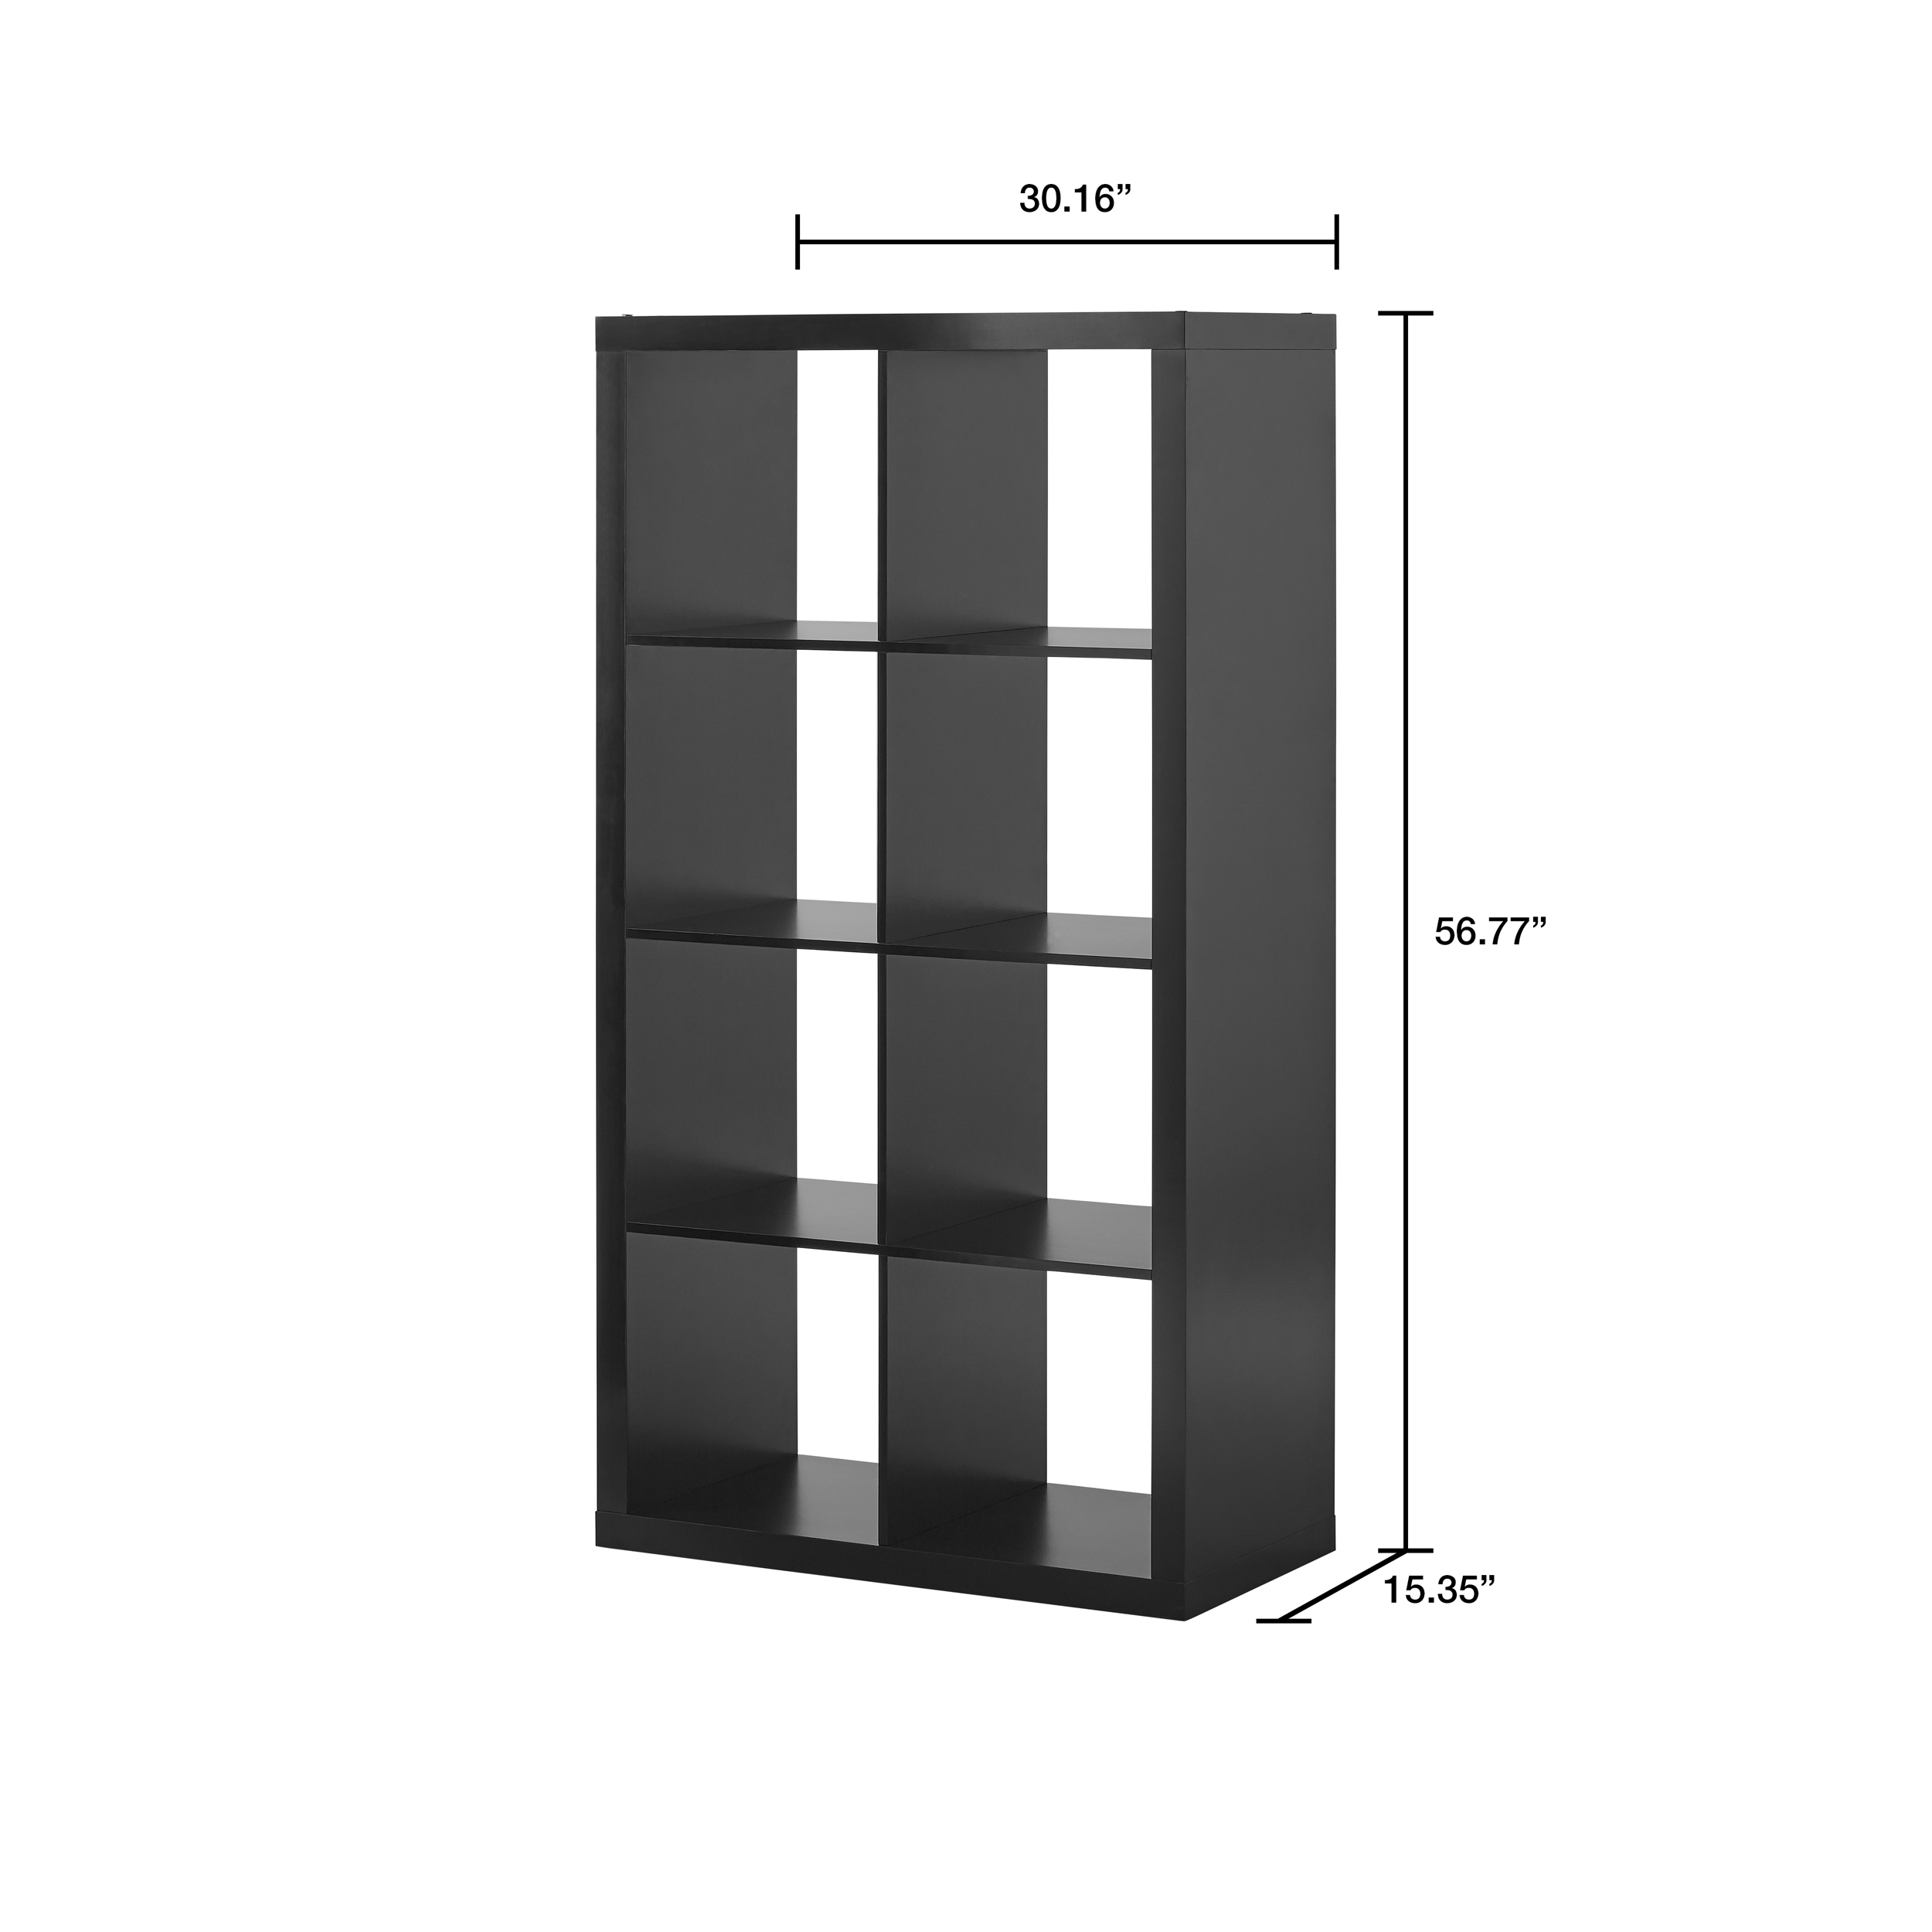 Better Homes & Gardens 8-Cube Storage Organizer, Solid Black - image 3 of 7